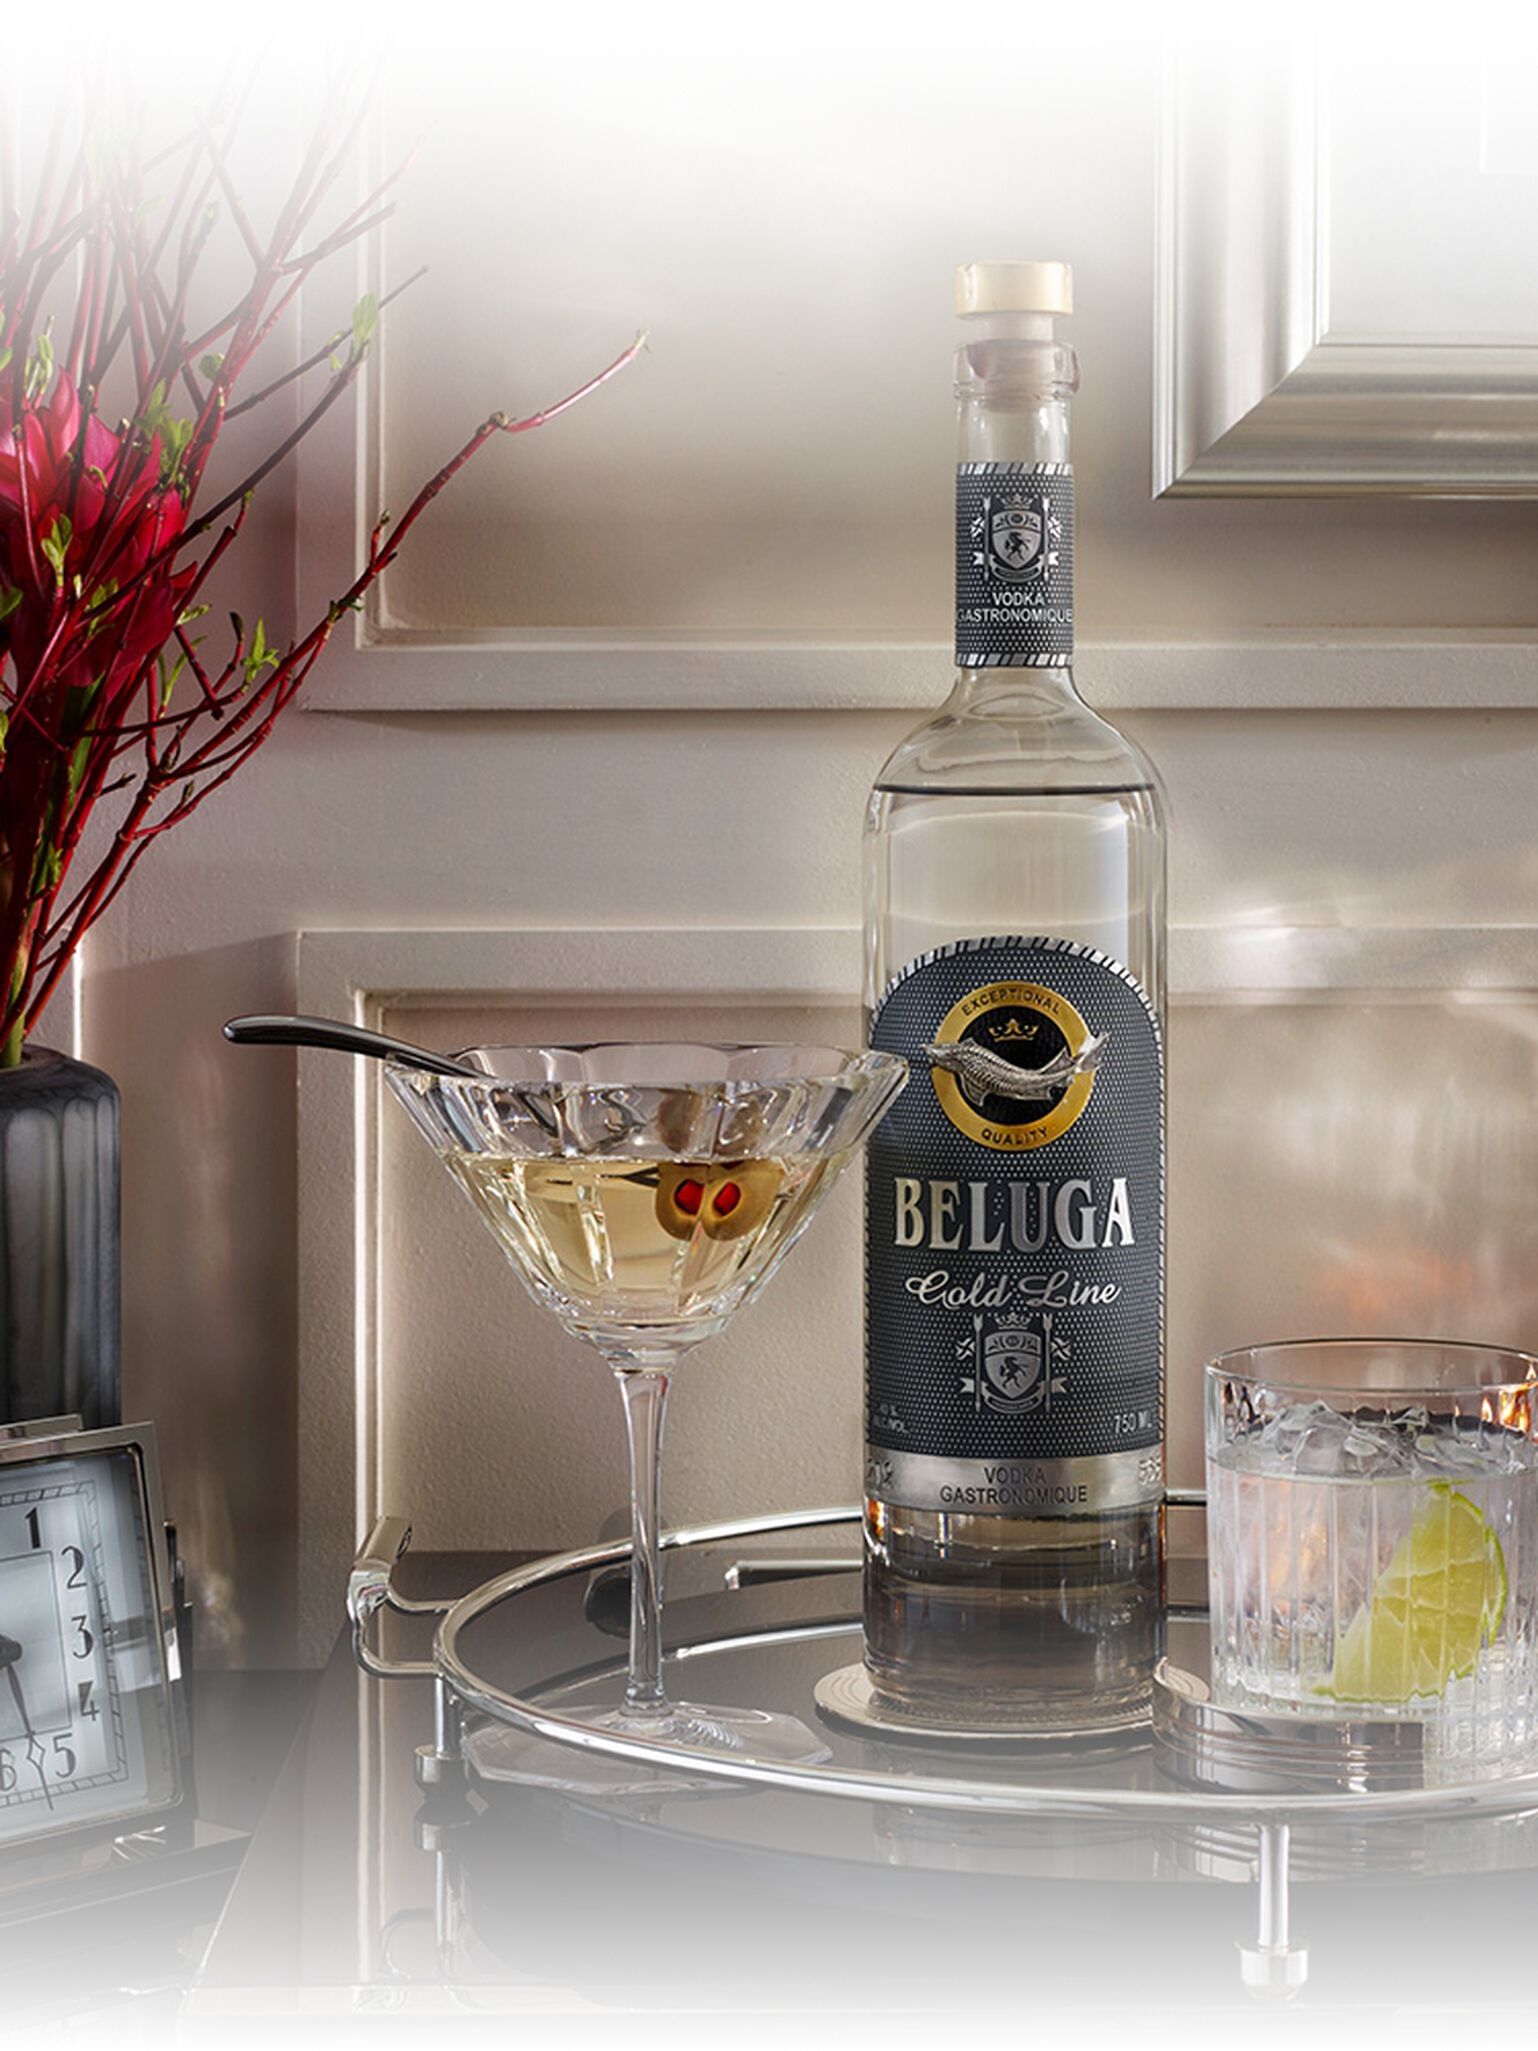 Bottle of Beluga Gold Line Vodka with cocktail tools and martini glasses